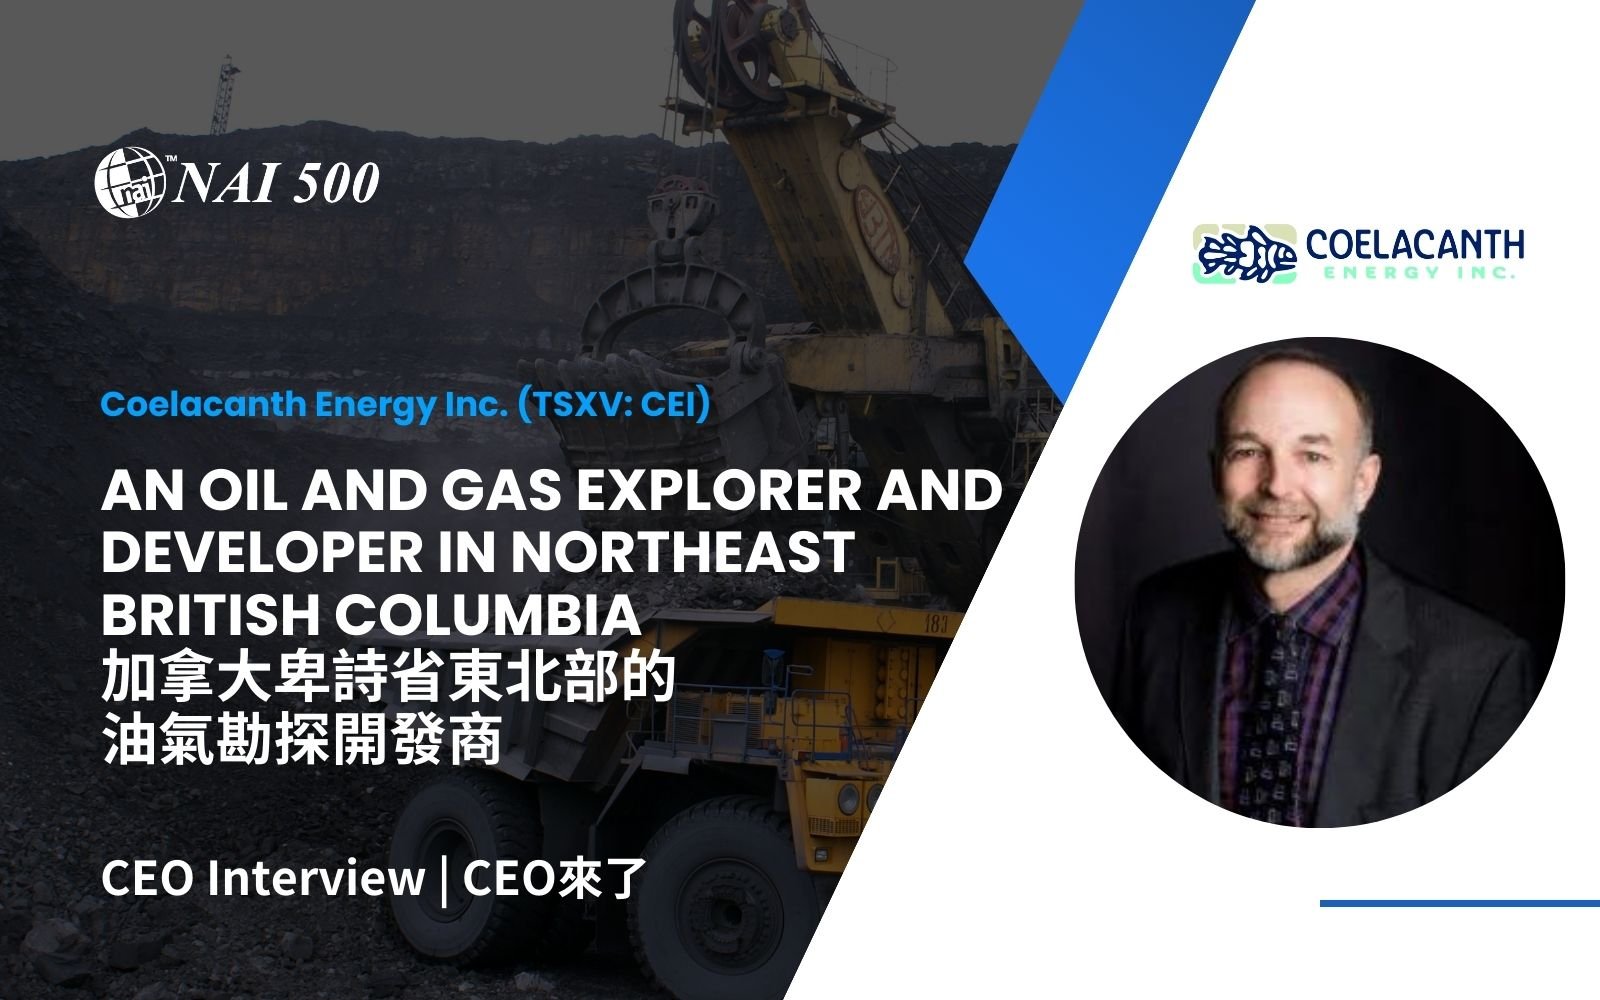 An Oil And Gas Explorer and Developer in Northeast British Columbia | Coelacanth Energy Inc.